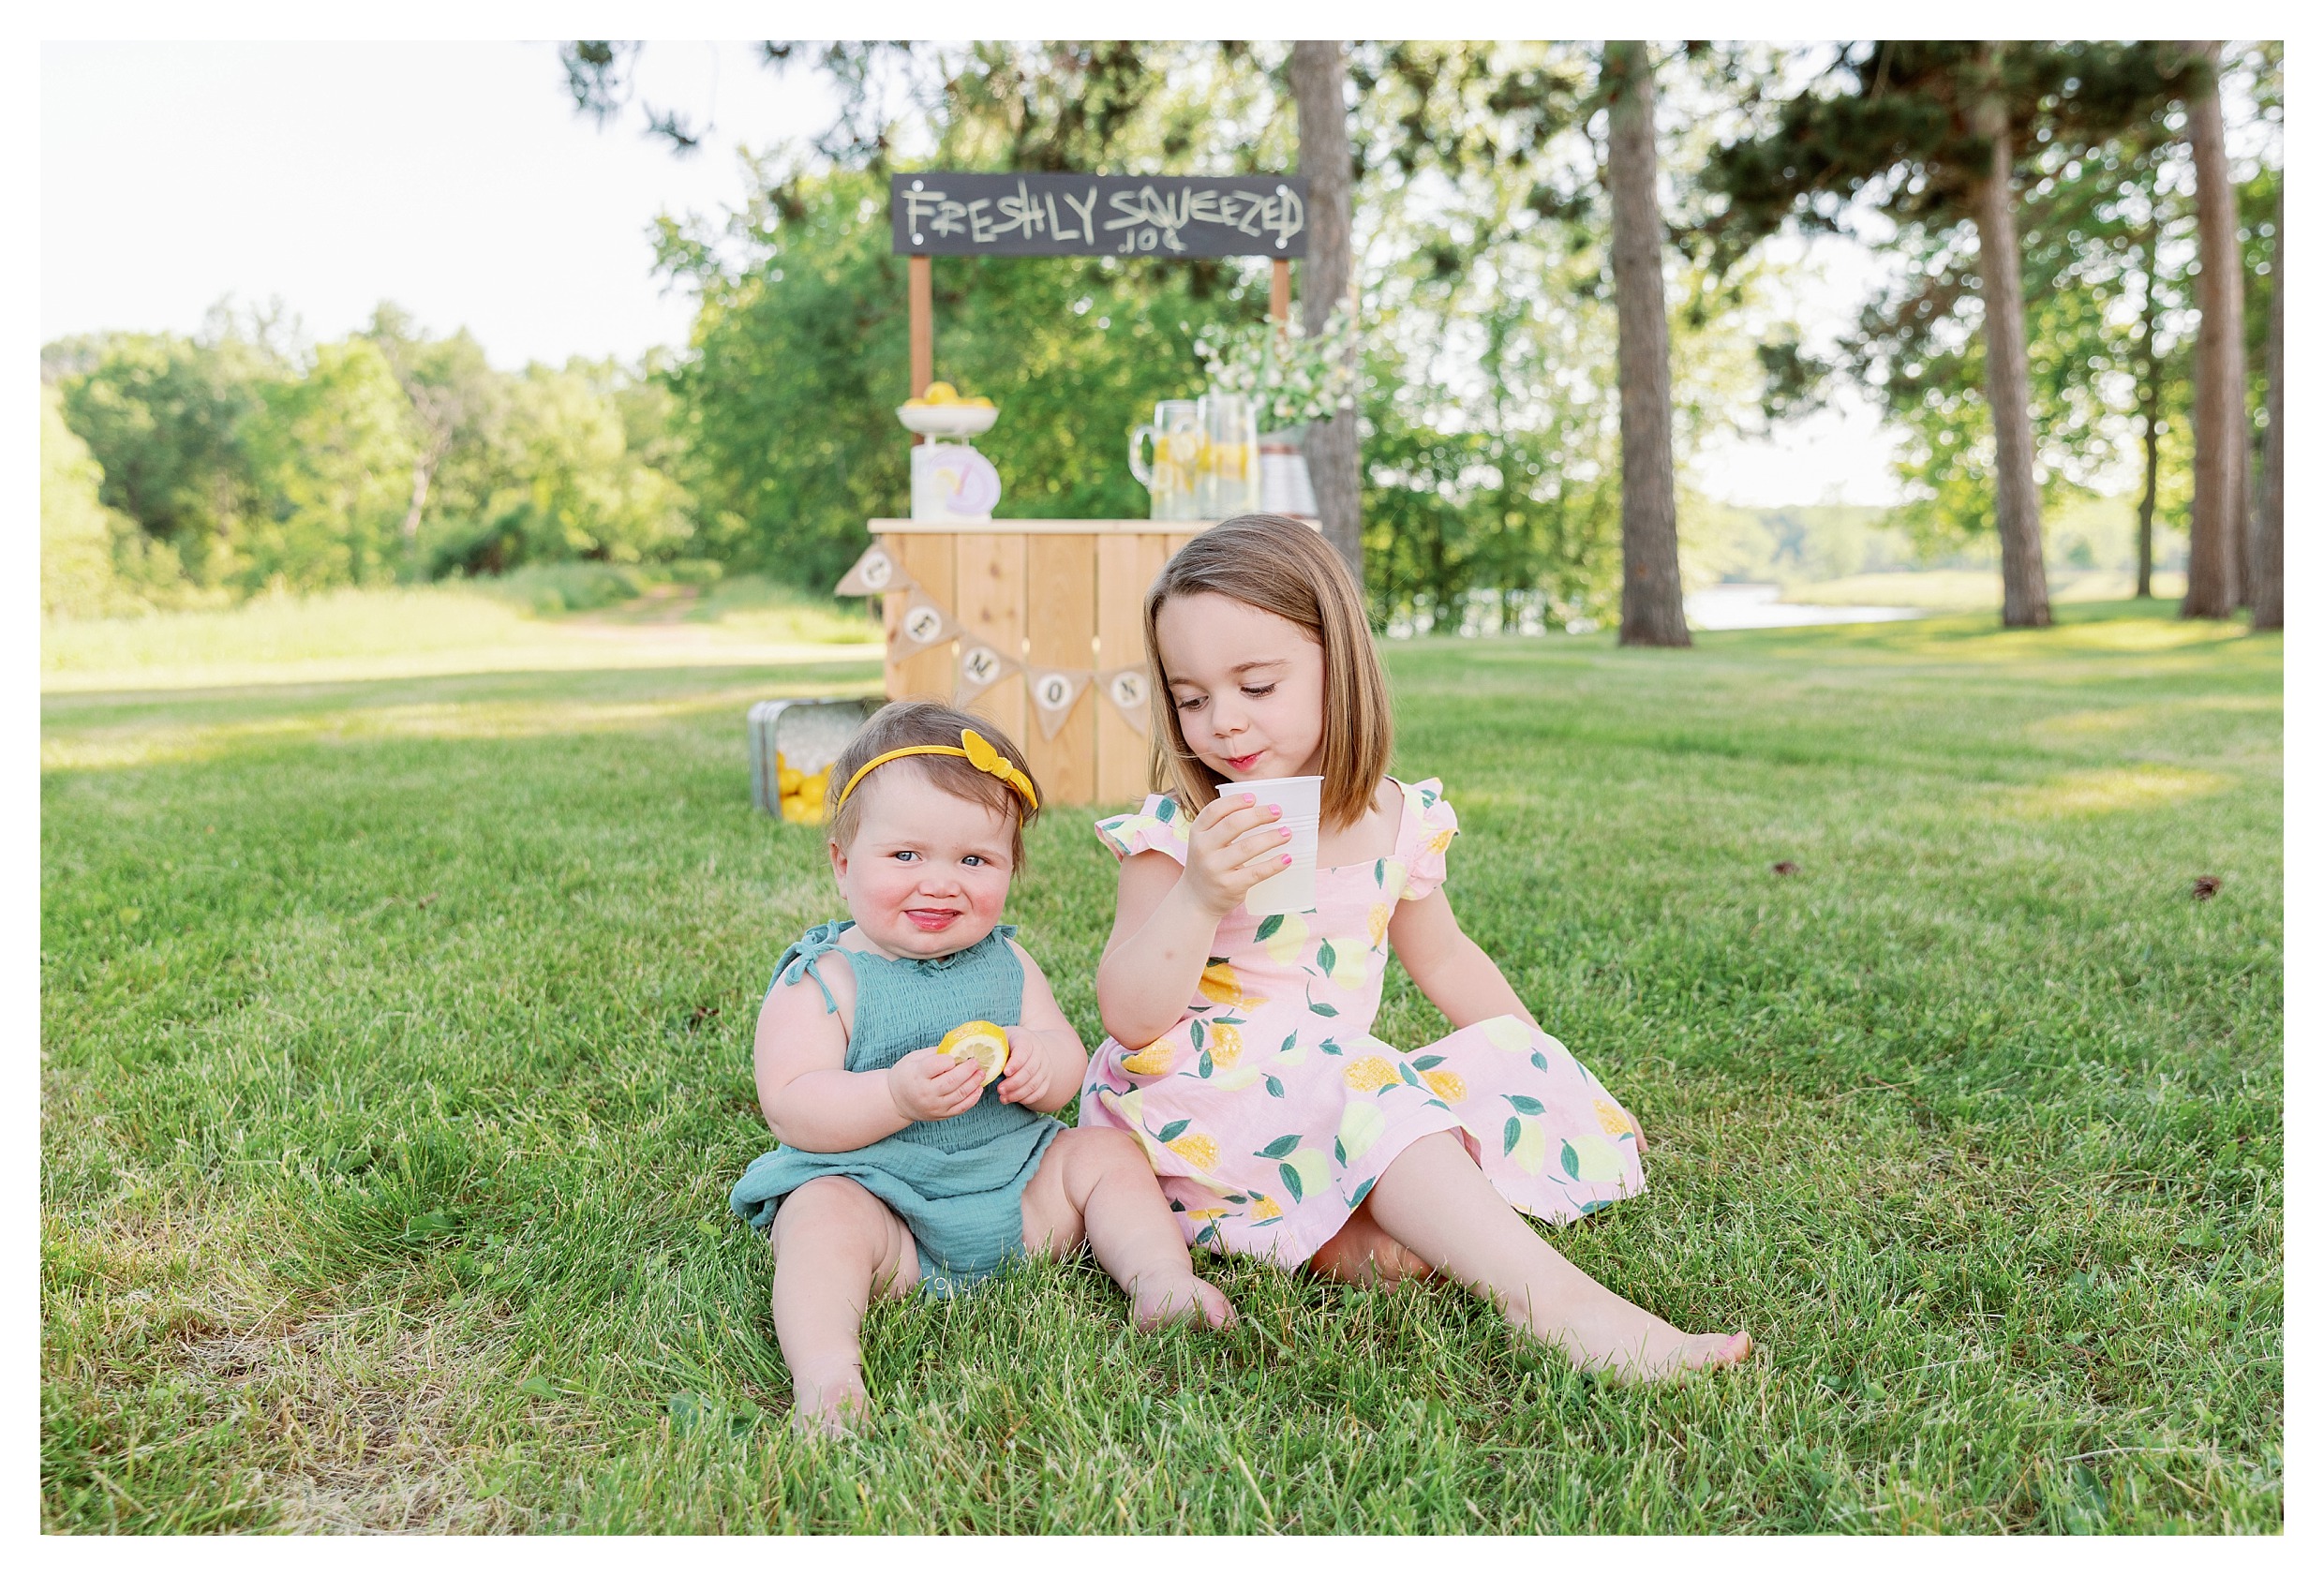 Sister pose at lemonade stand mini session in Wausau, WI at Sunnyvale park 